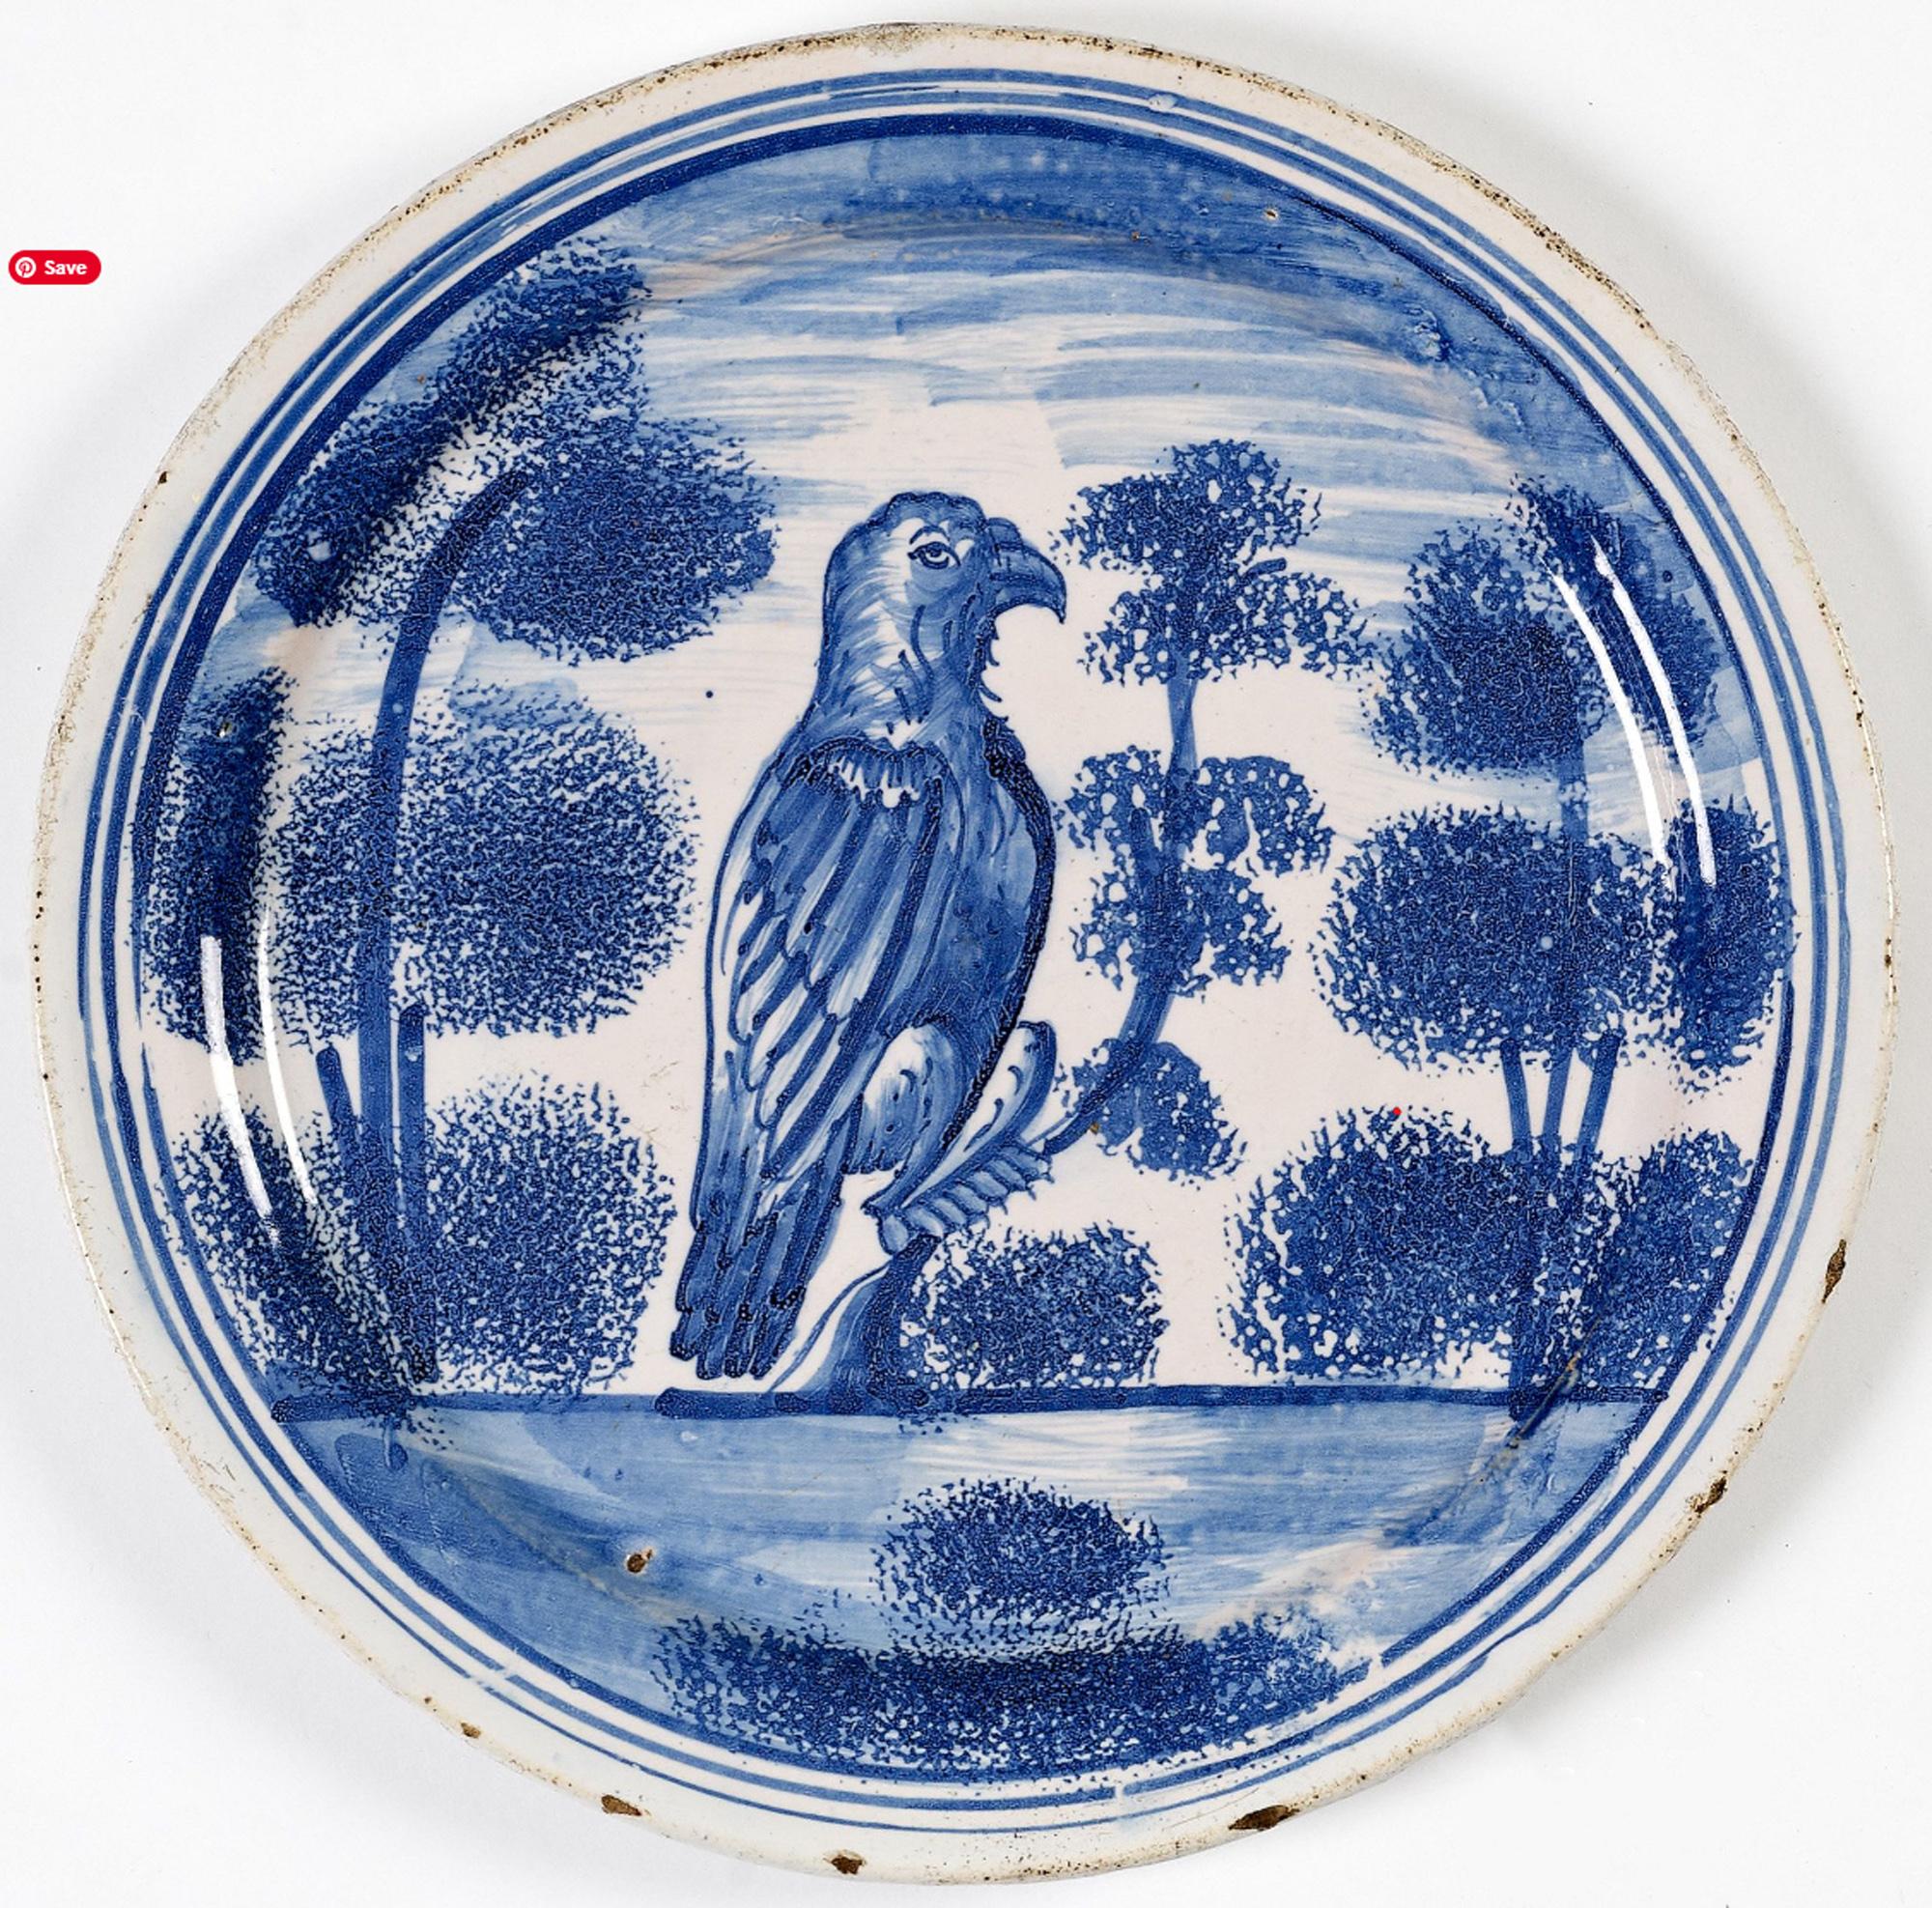 English Delftware Plate with Hawk Perched on Tree, 
London,
Probably Vauxhall,
Circa 1710-25

The circular plate  is painted and sponged.  It depicts a large hawk perched in a tree with other tree to each side.  The border has concentric blue lines